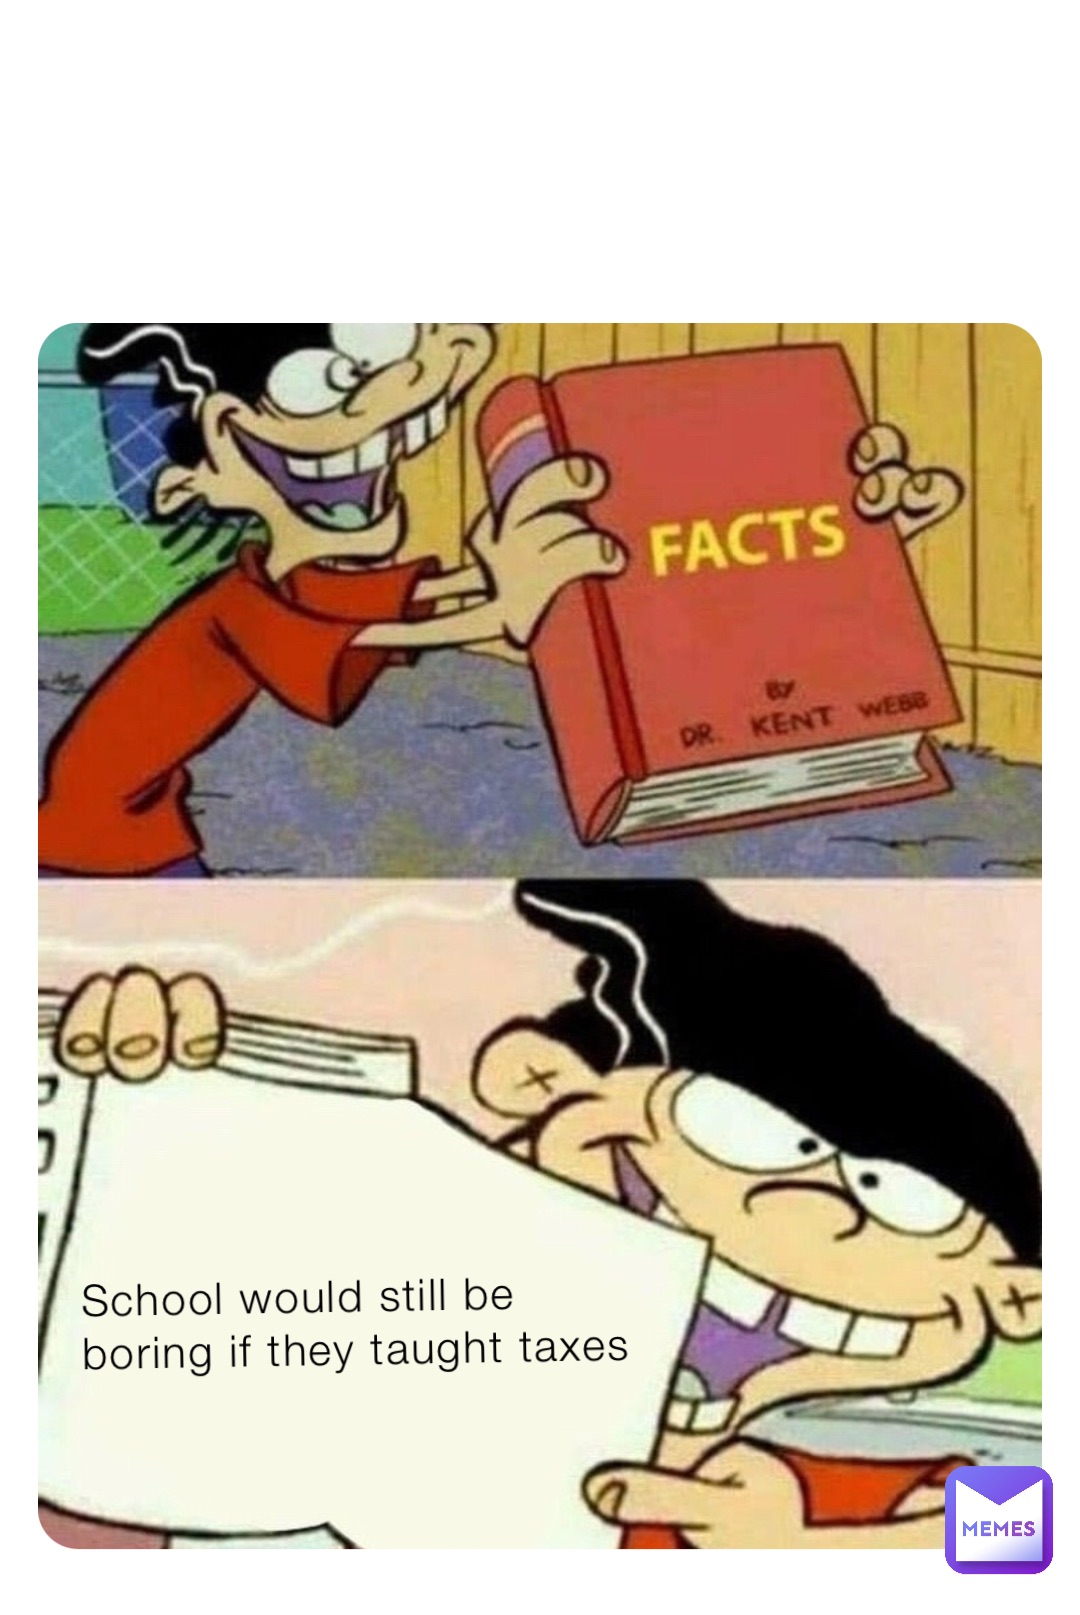 School would still be boring if they taught taxes